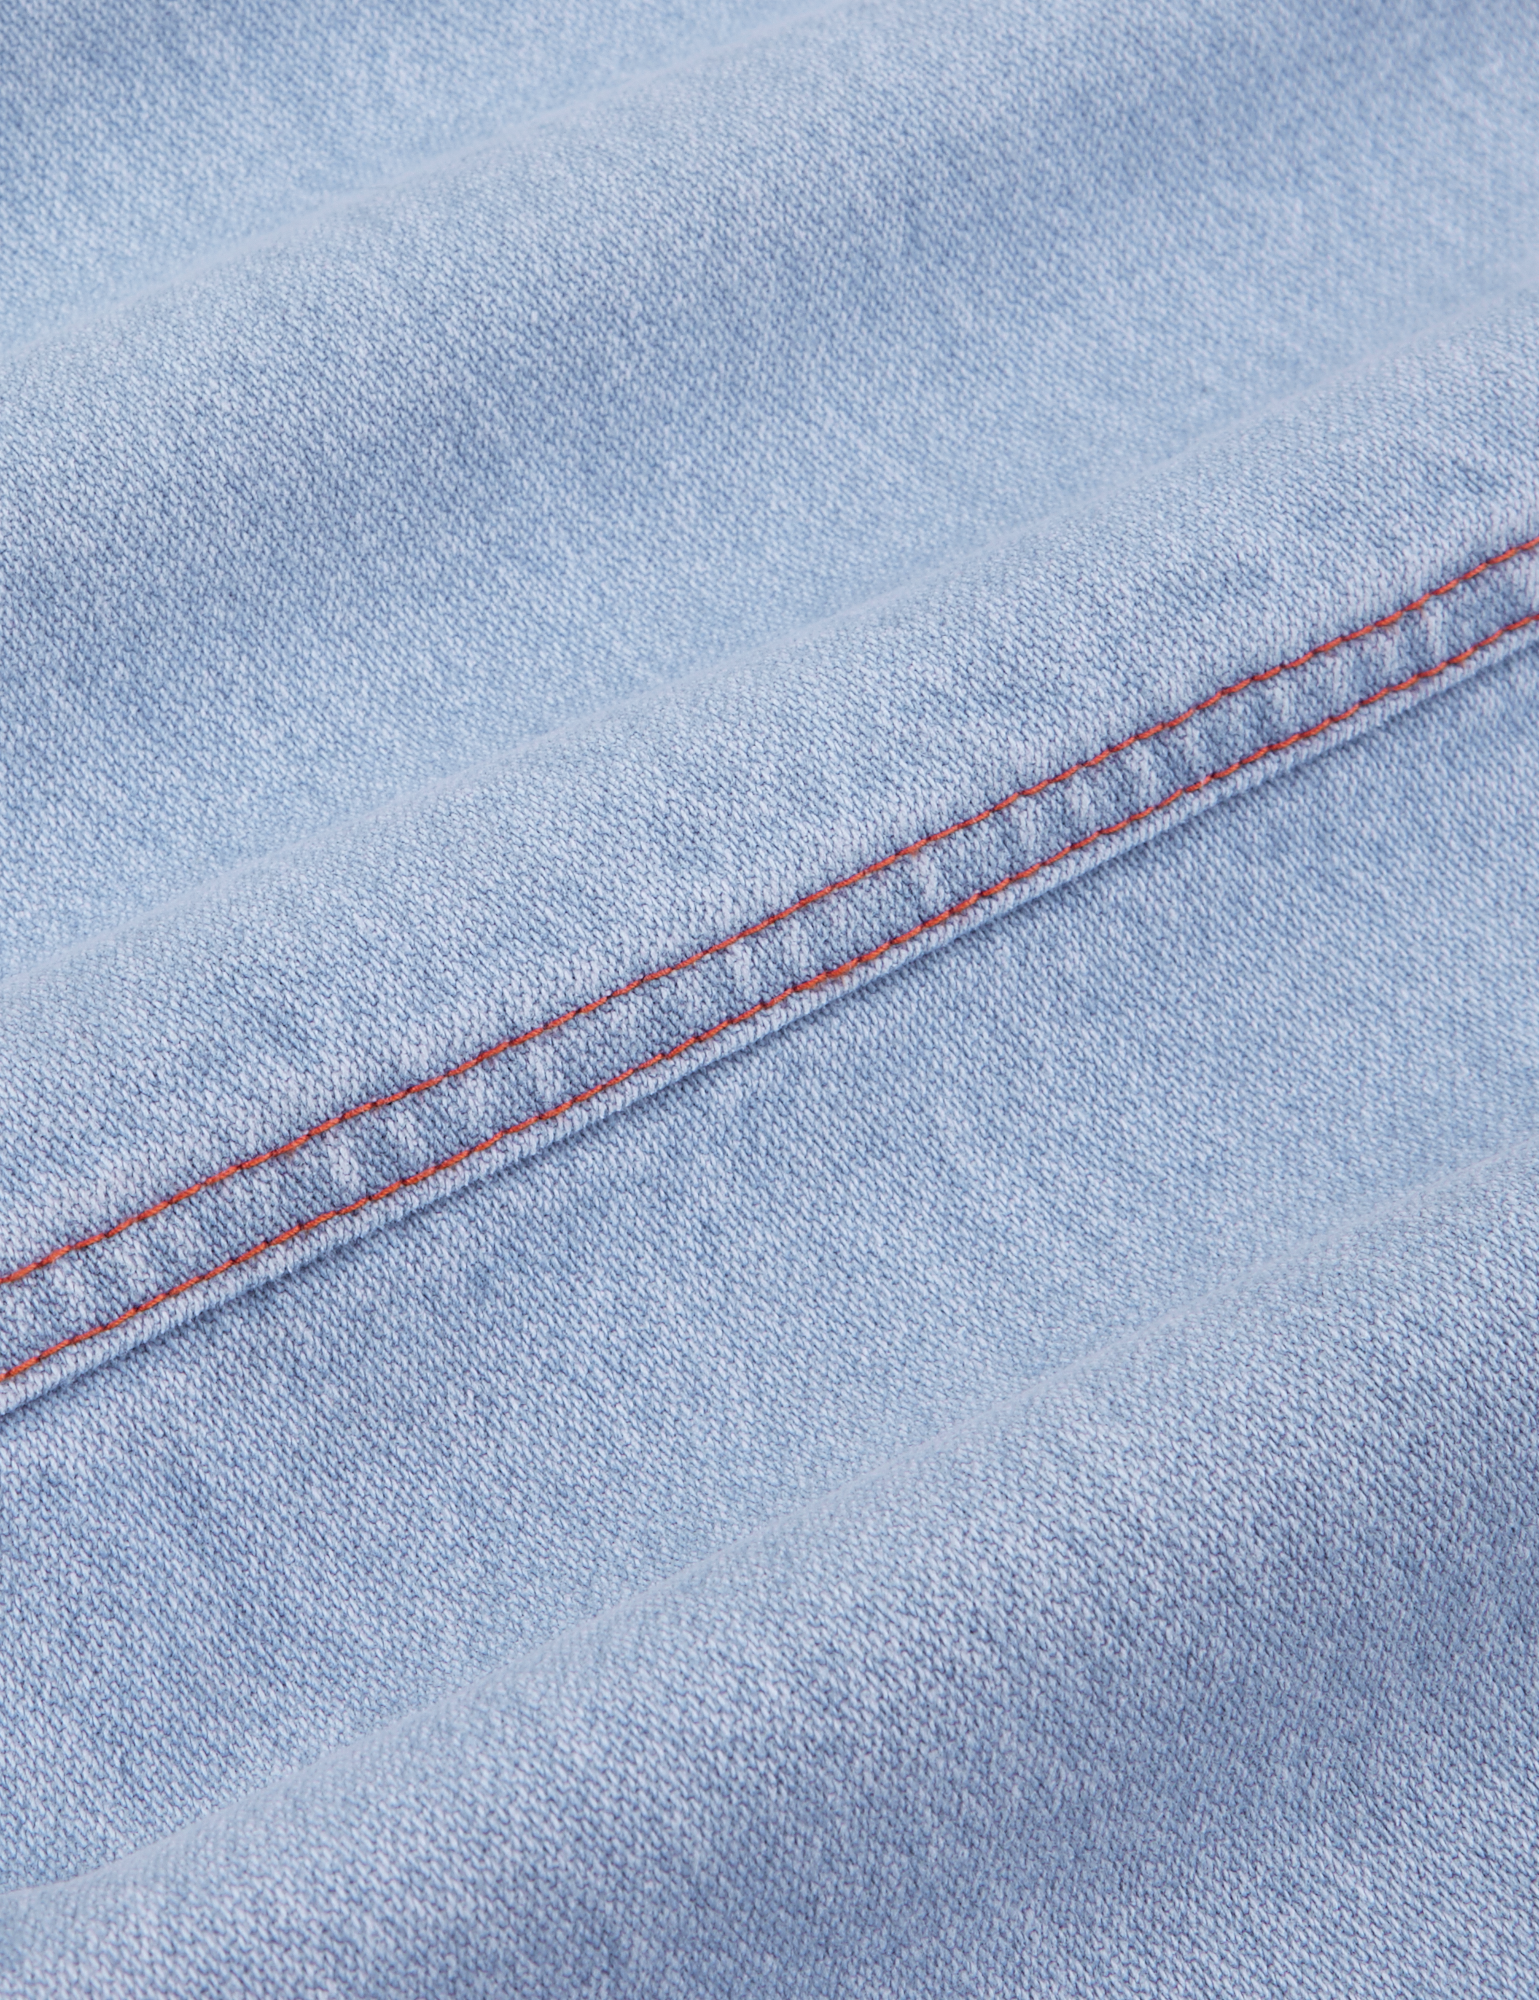 Carpenter Jeans in Light Wash fabric detail close up with red contrast stitching